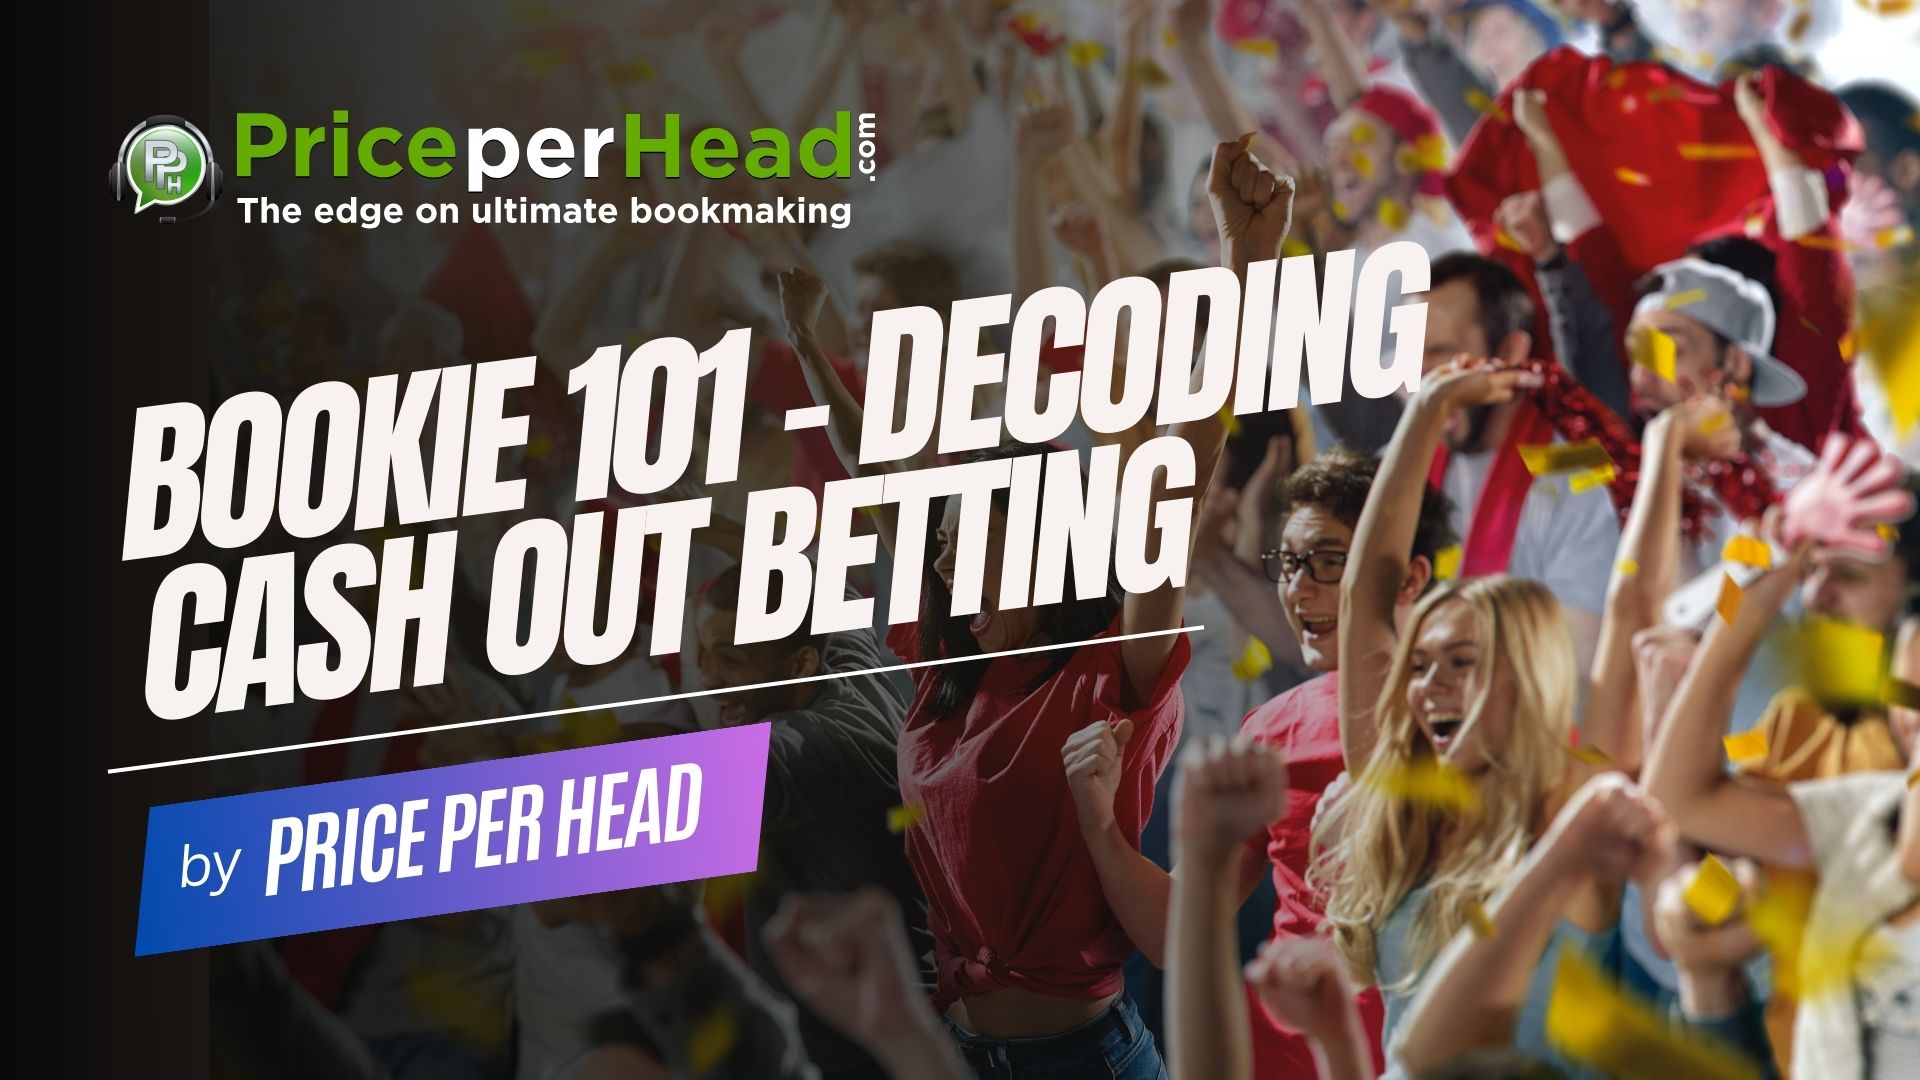 decoding cash out betting, pay per head services, price per head